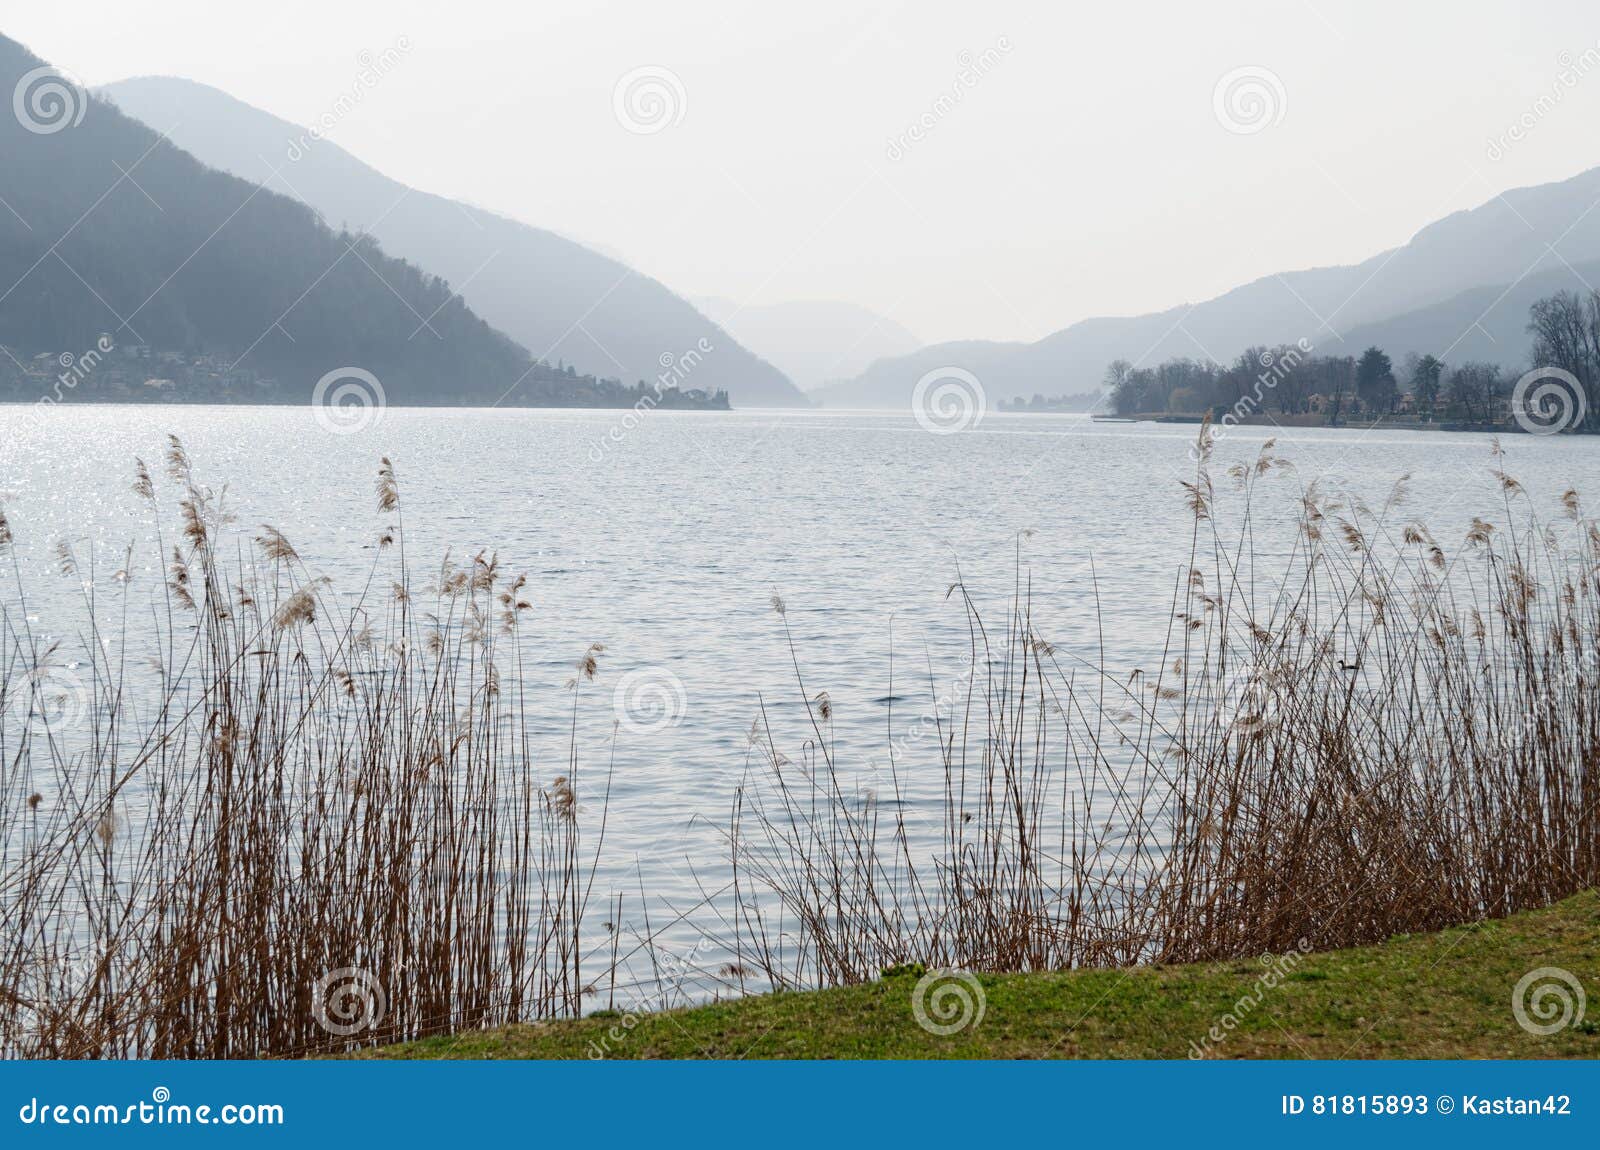 lake lago di lugano, switzerland, with dry reeds and mountains